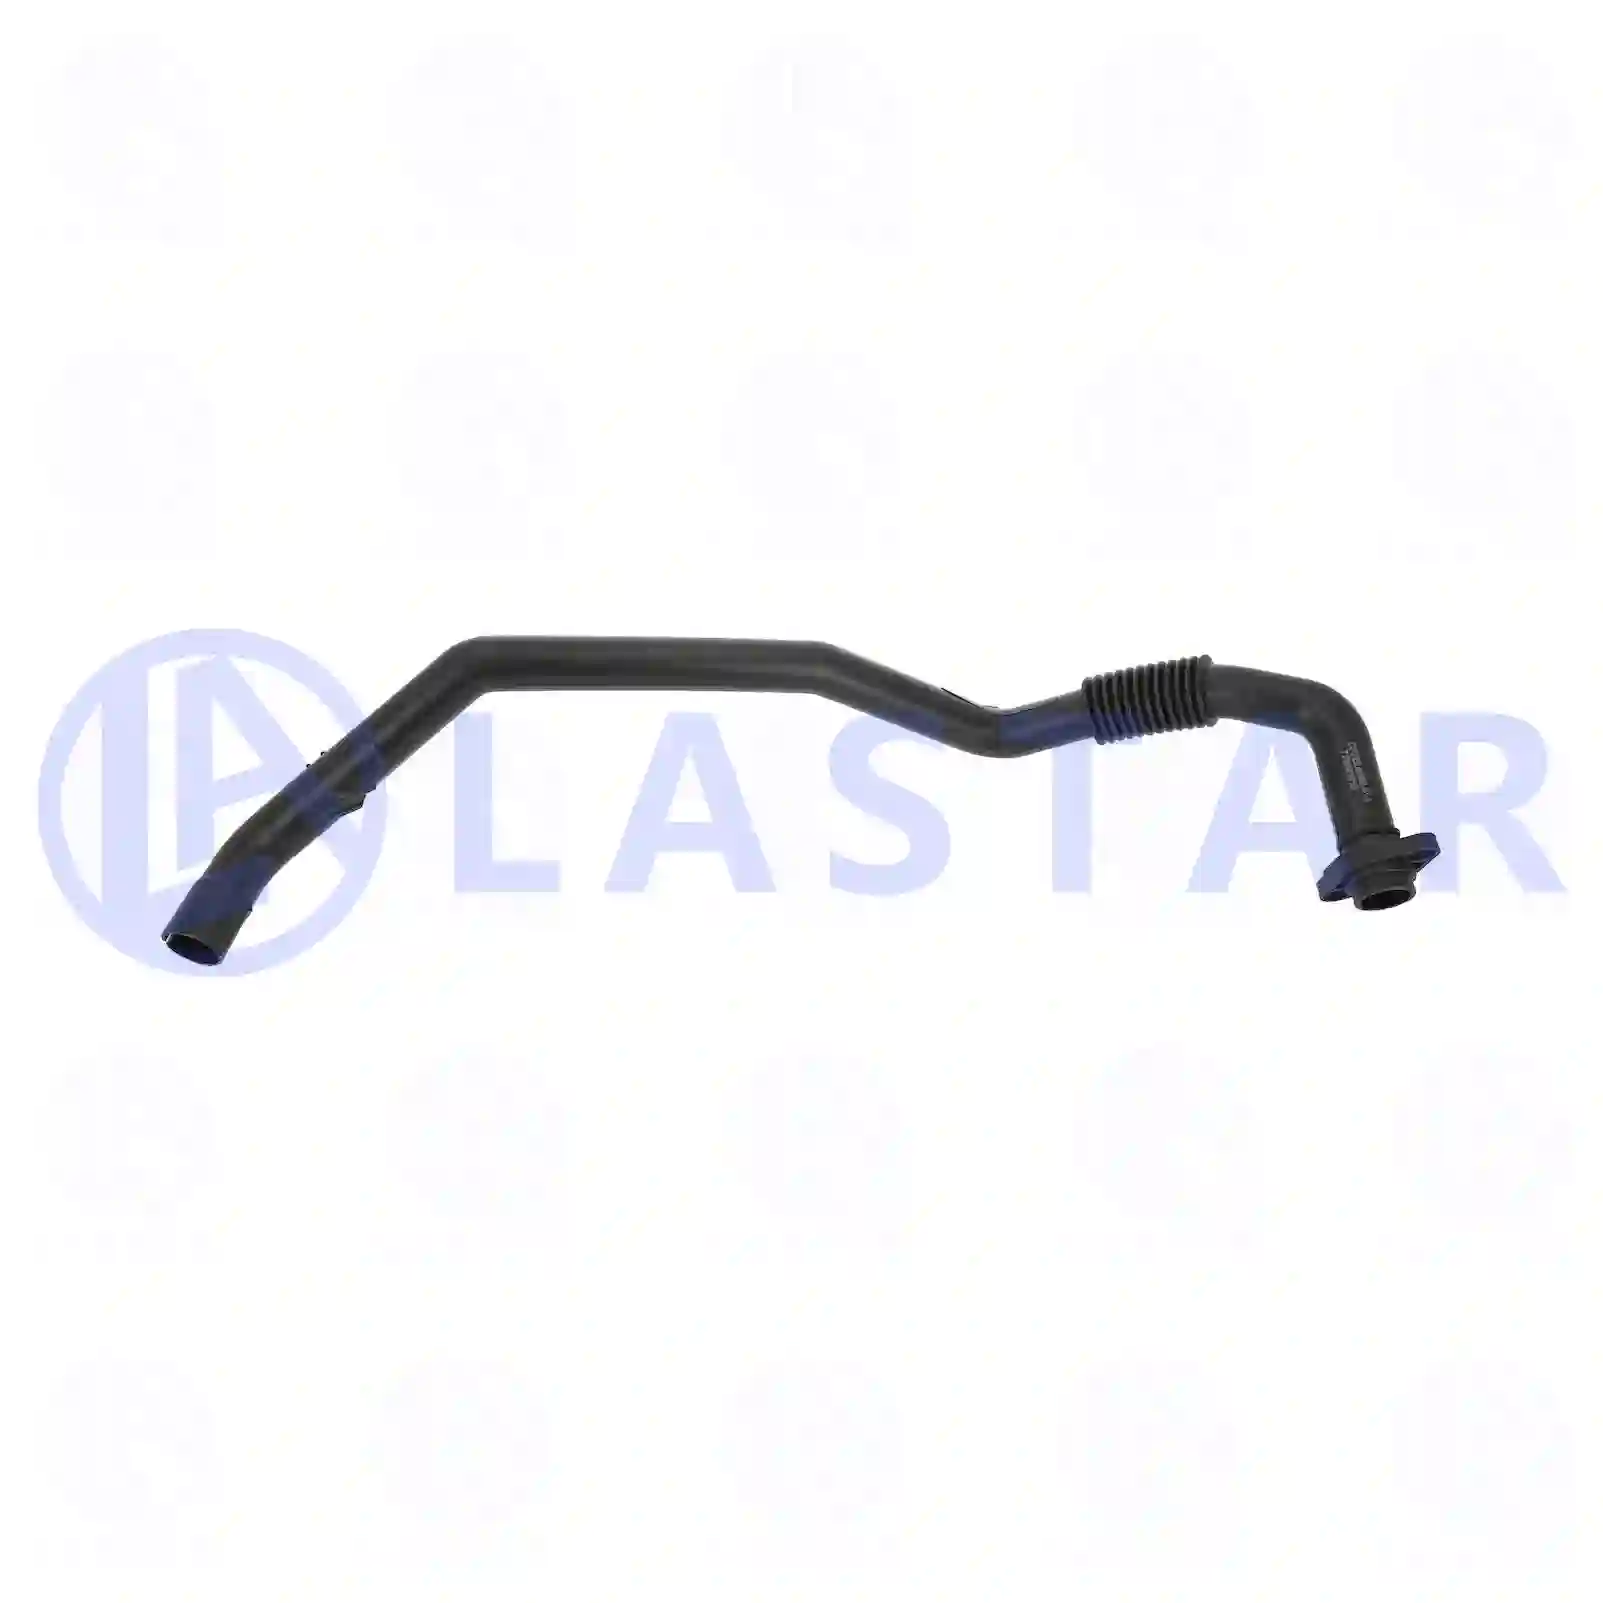 Oil filler connector, lower, 77700768, 20954042, ZG01694-0008 ||  77700768 Lastar Spare Part | Truck Spare Parts, Auotomotive Spare Parts Oil filler connector, lower, 77700768, 20954042, ZG01694-0008 ||  77700768 Lastar Spare Part | Truck Spare Parts, Auotomotive Spare Parts